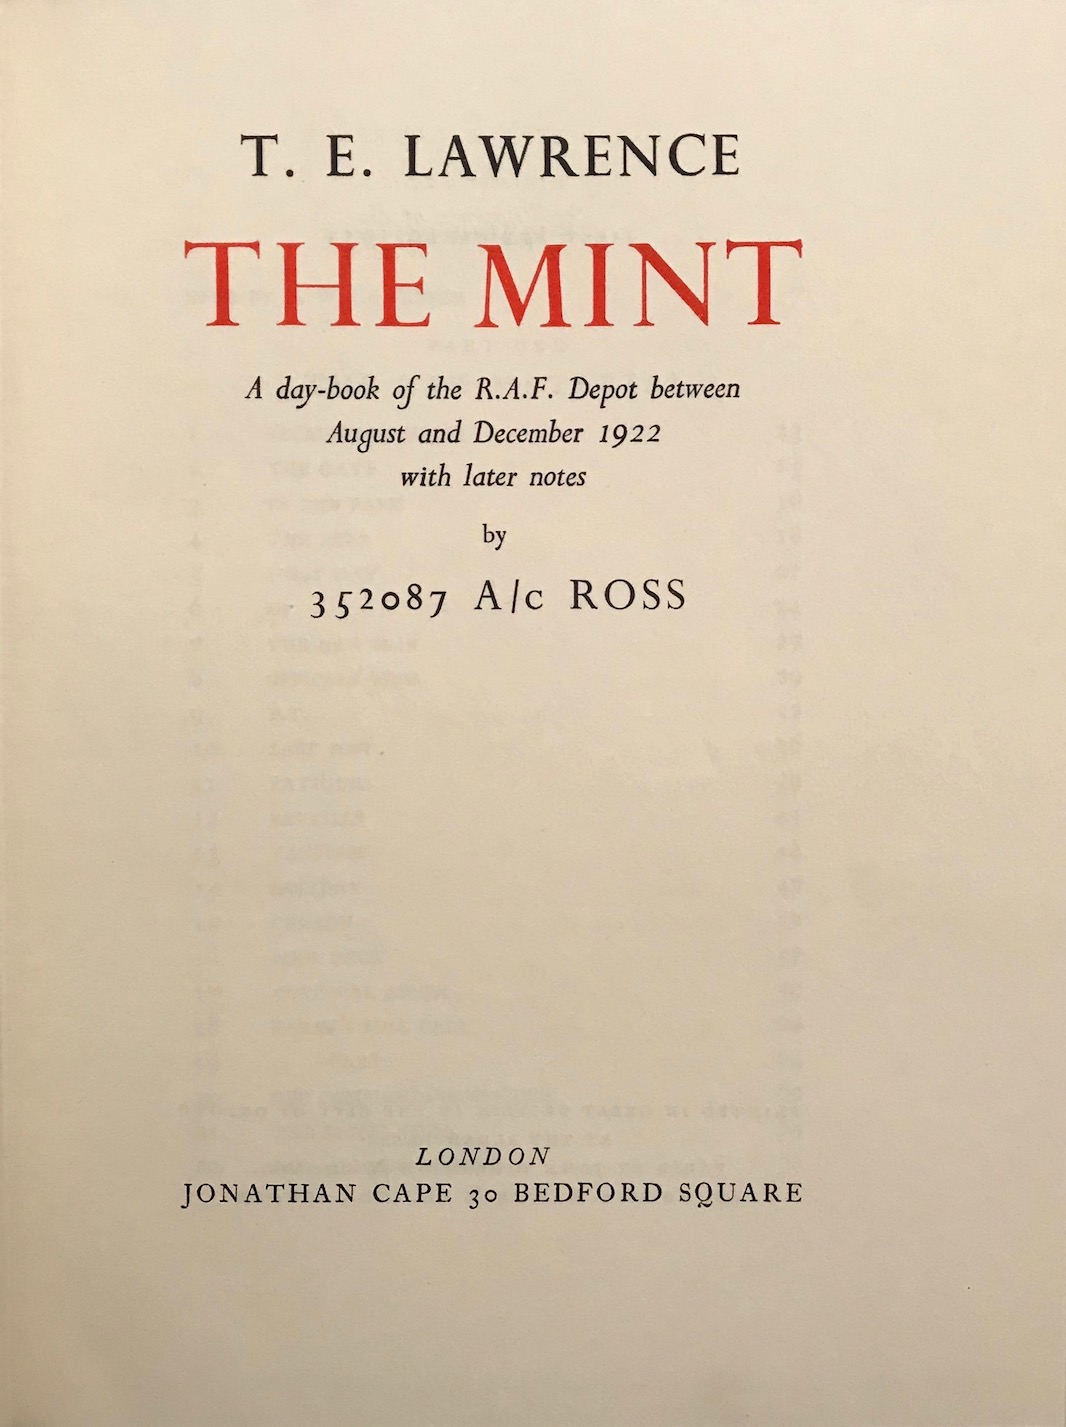 T.E. Lawrence: The Mint, 1955. £75